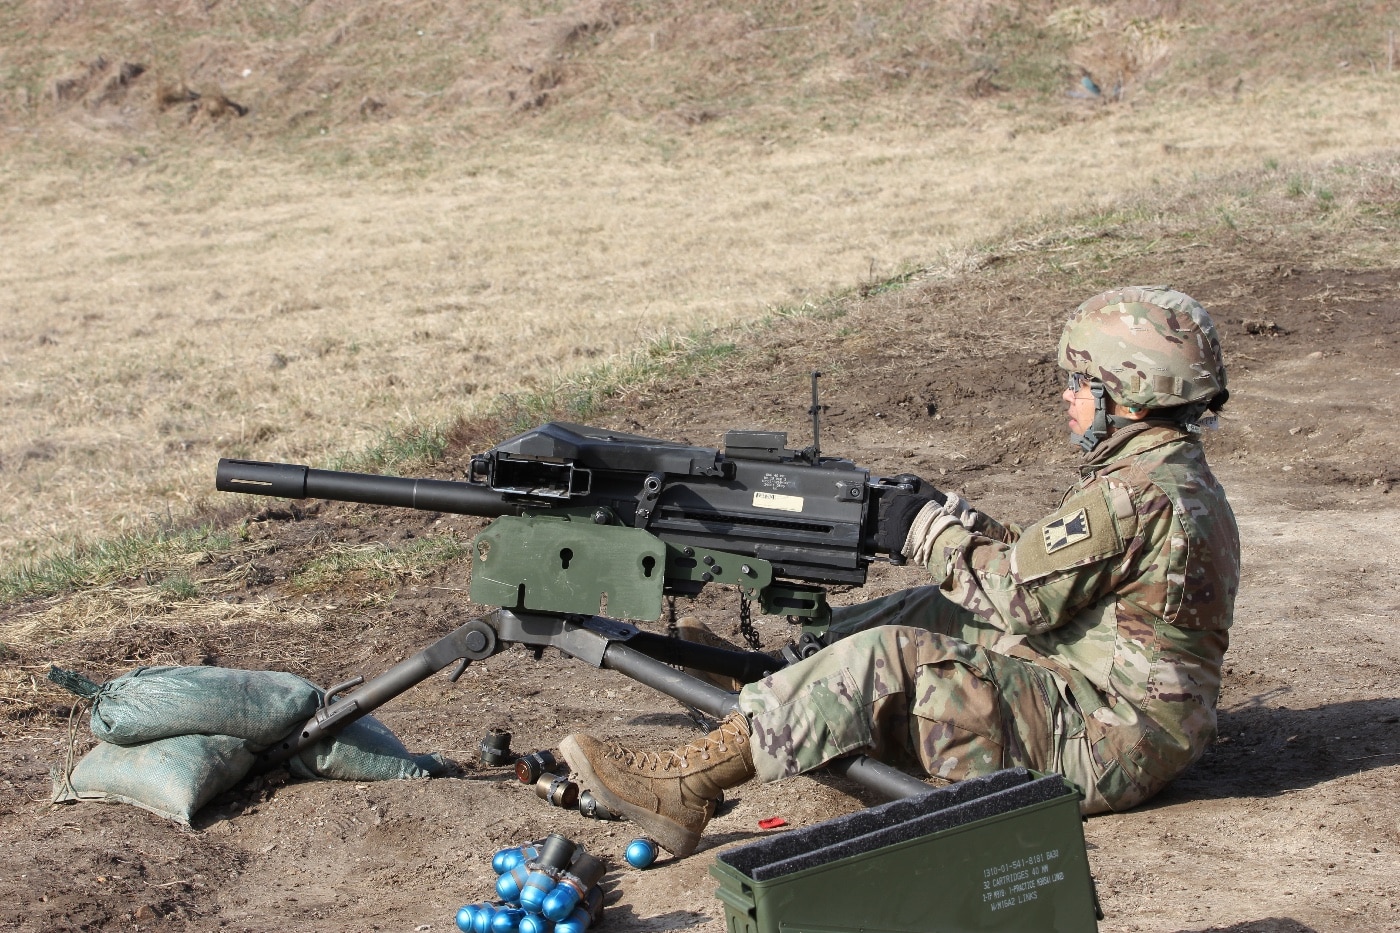 The image shows a U.S. Army soldier firing the Mk19 automatic grenade launcher during a training exercise in Indiana. The Mk19 is a belt-fed, crew-served automatic weapon that launches 40mm grenades at the enemy. Also known as 40 mike mike, these rounds come in a variety of packages including high-explosive and anti-armor. These weapon systems are dual-purpose, allowing for both direct and indirect firing of 40 mm rounds. They are used by the Army and Marine Corps.